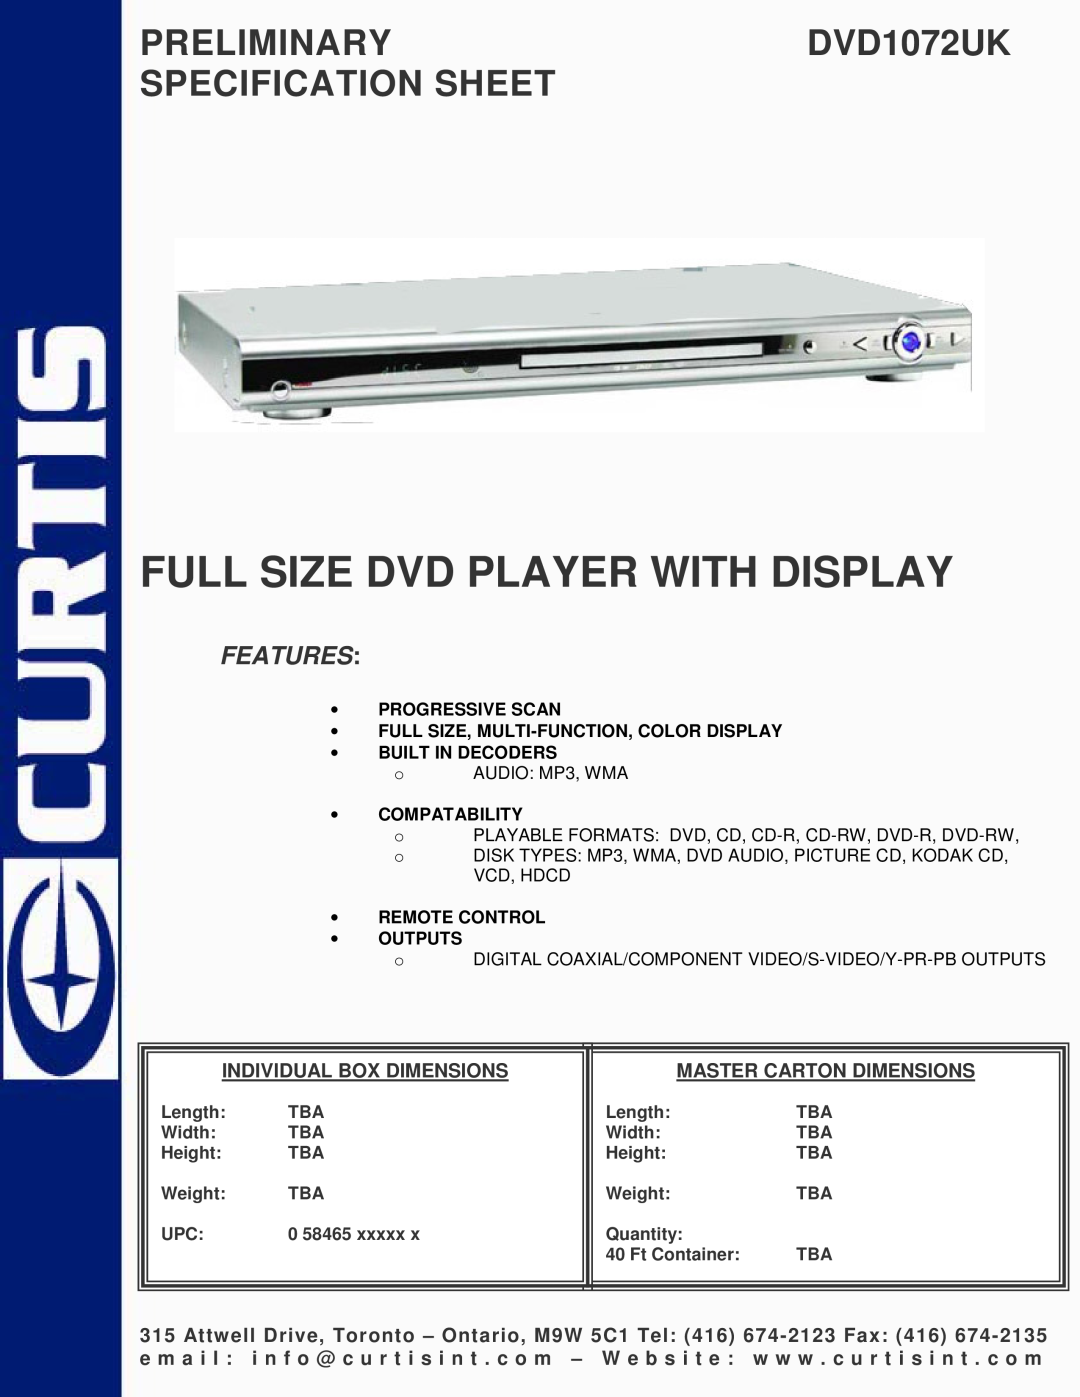 Curtis specifications Full Size Dvd Player With Display, PRELIMINARYDVD1072UK SPECIFICATION SHEET, Features 